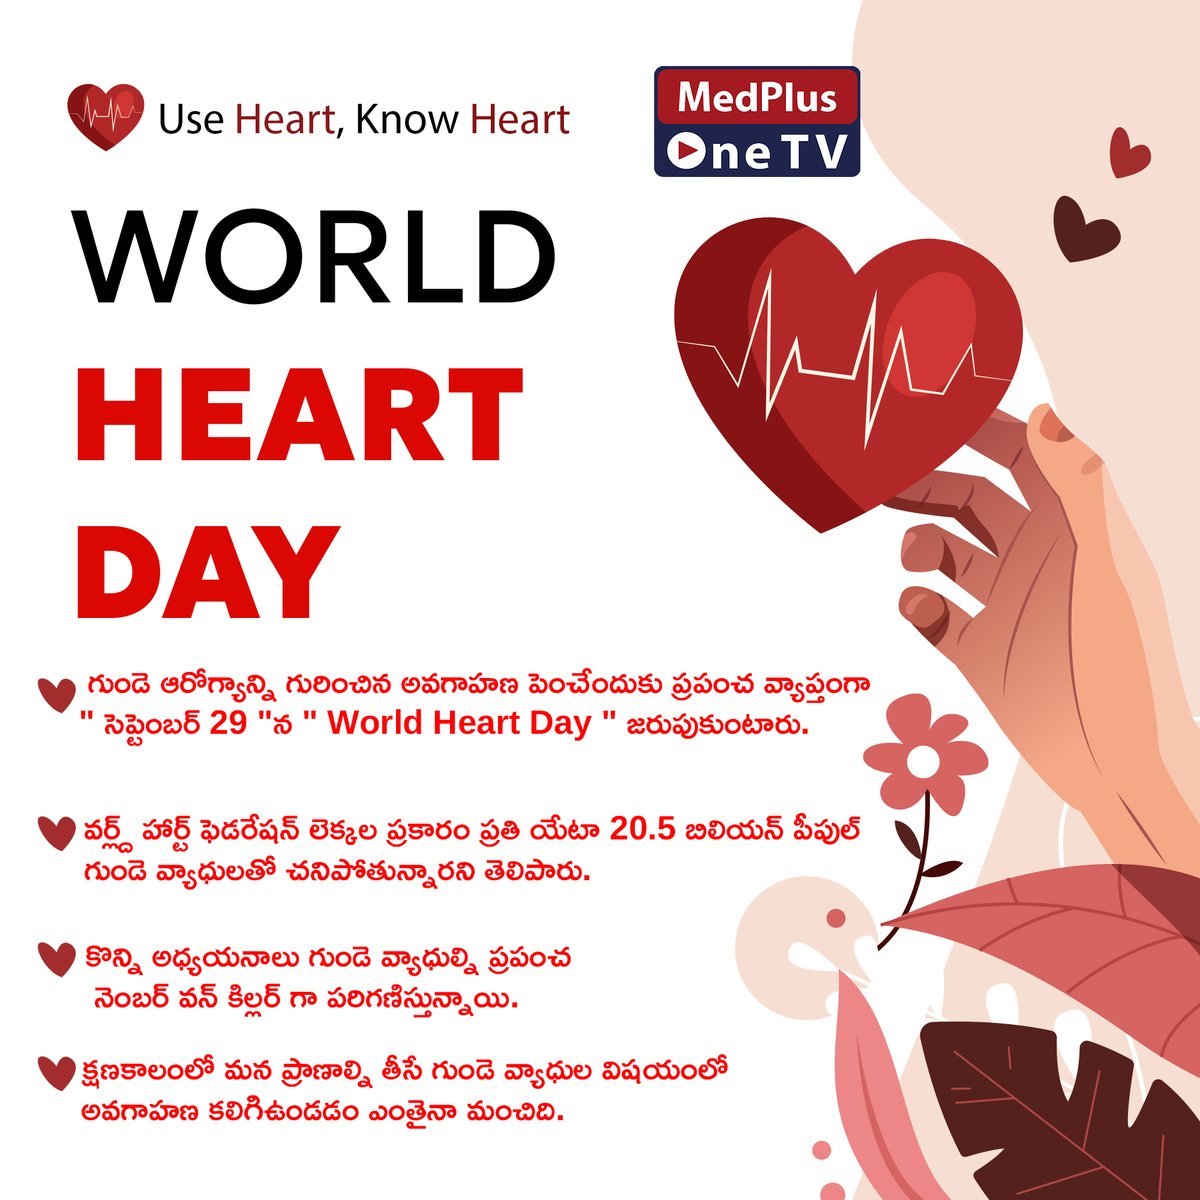 Theme For Heart Day 2023 : Use Heart, Know Heart (Use ❤️ Know ❤️)
For Heart-Related Valuable Information: MedPlus One TV
#29thSeptember #September2023
#healthcare
#happyworldheartday #WorldHeartDay #heartday